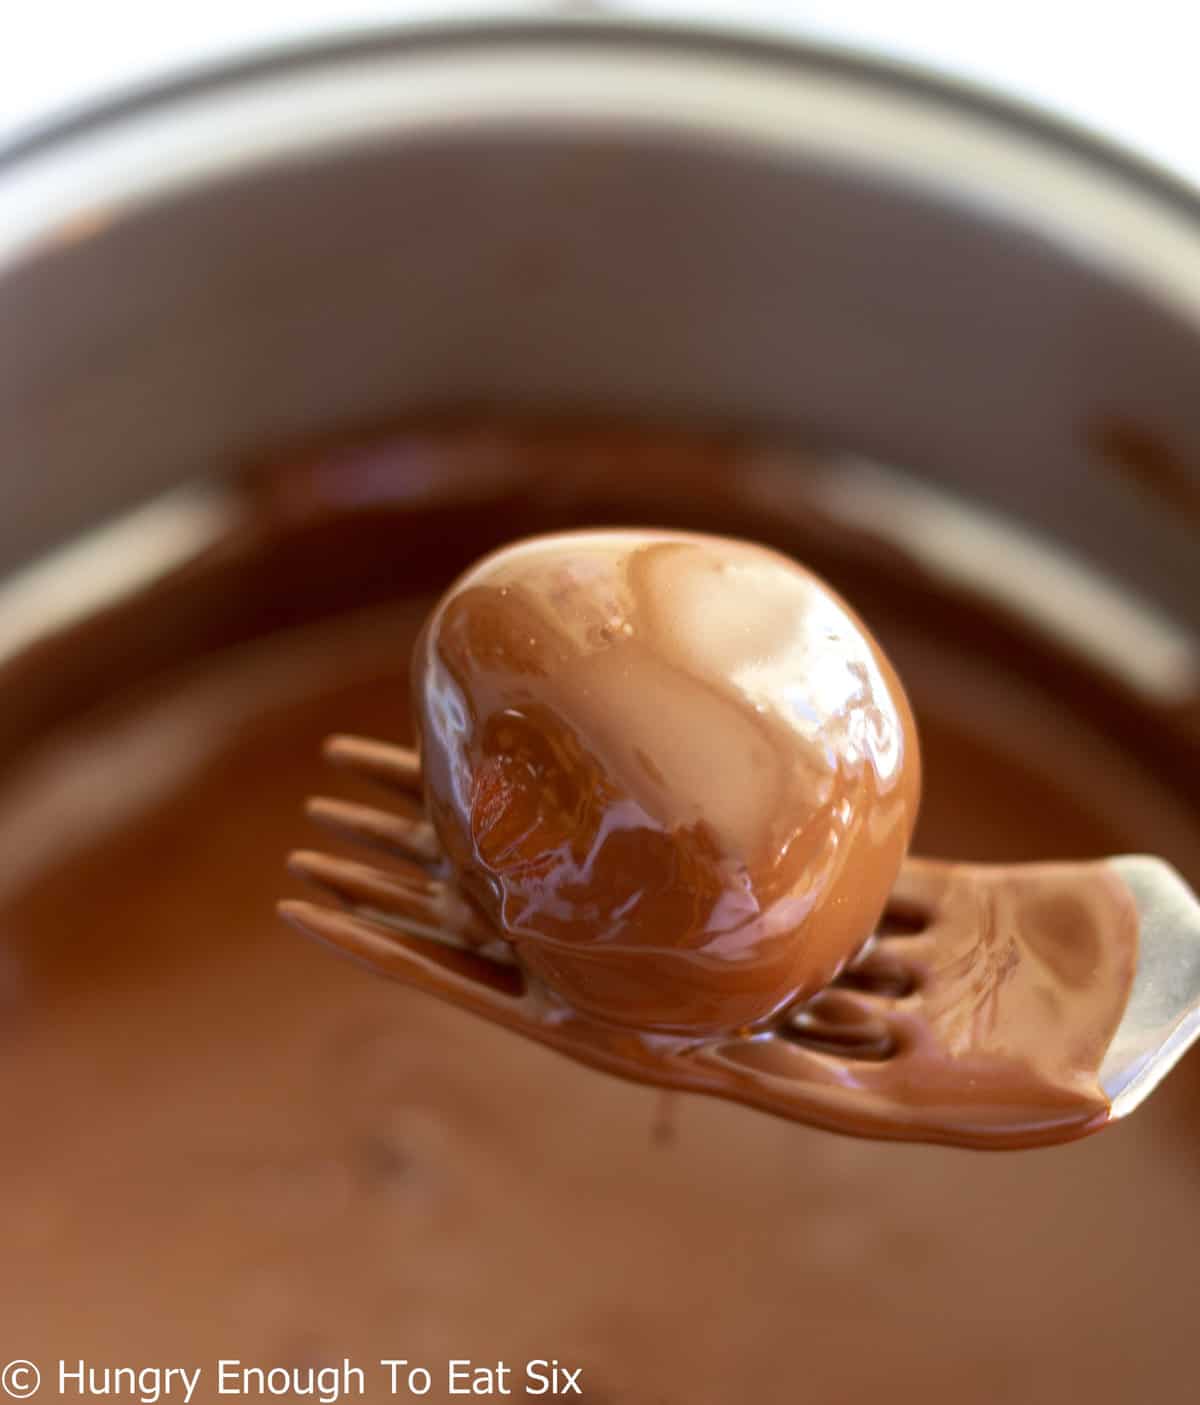 Chocolate coated peanut butter ball sitting on times of a fork.